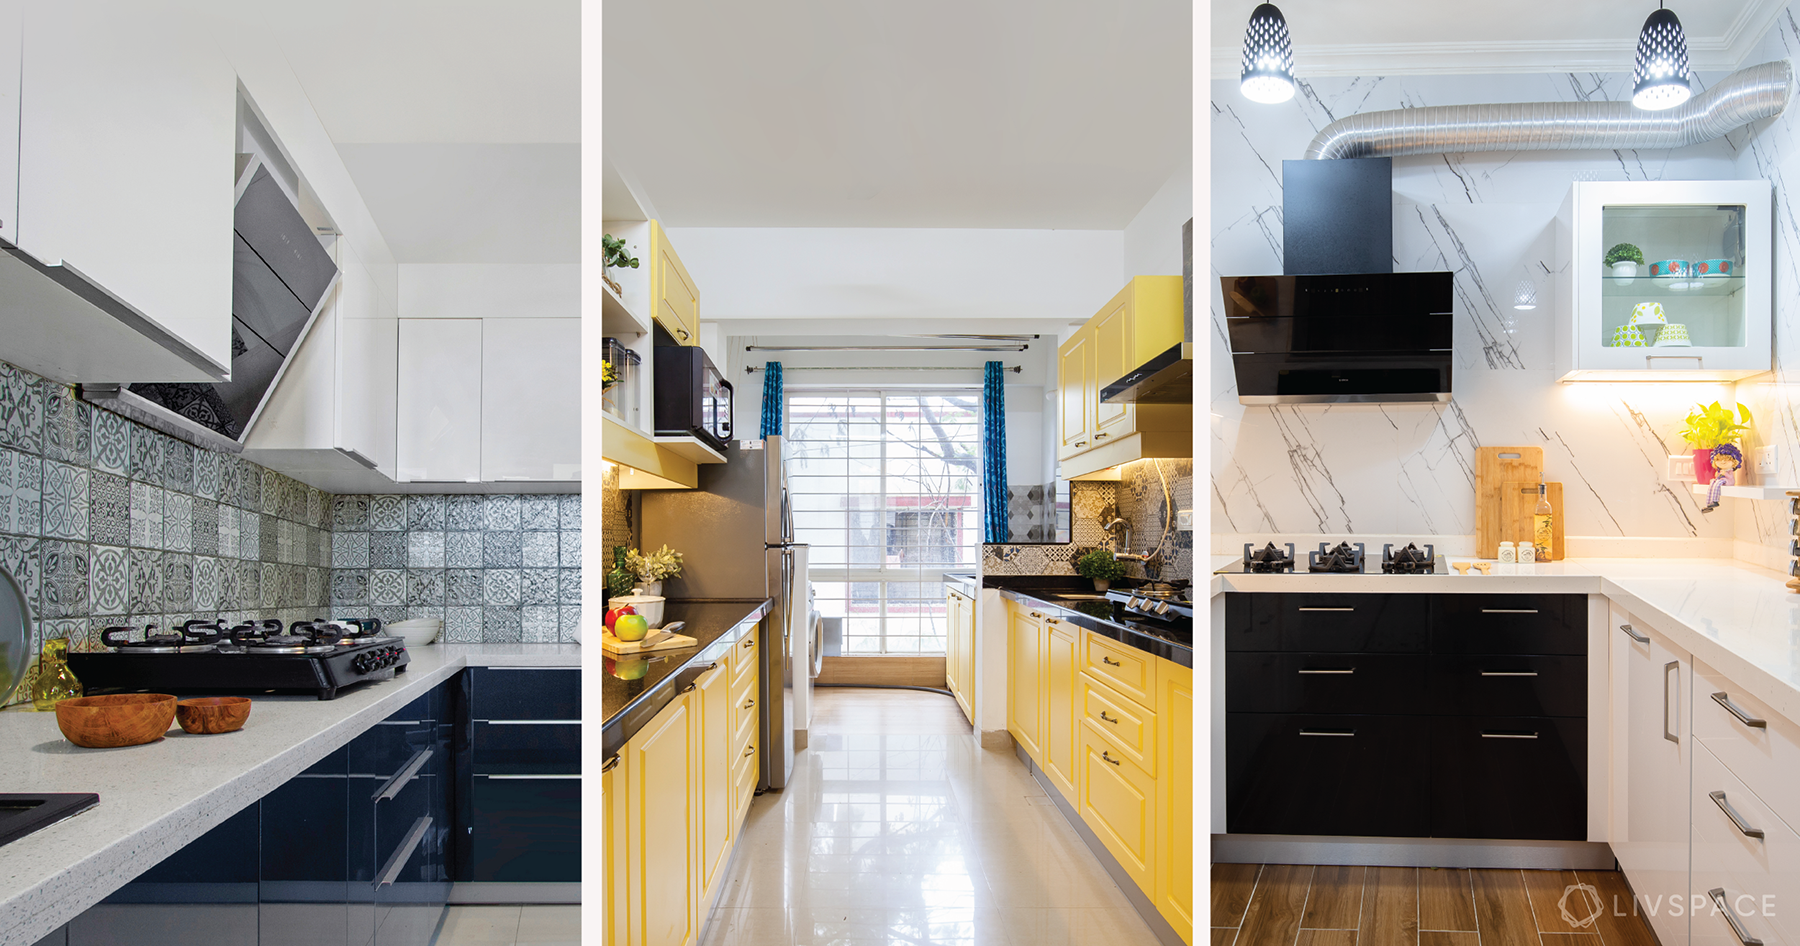 20 Small Kitchens Under 200 sq. ft. What Makes Them Amazing